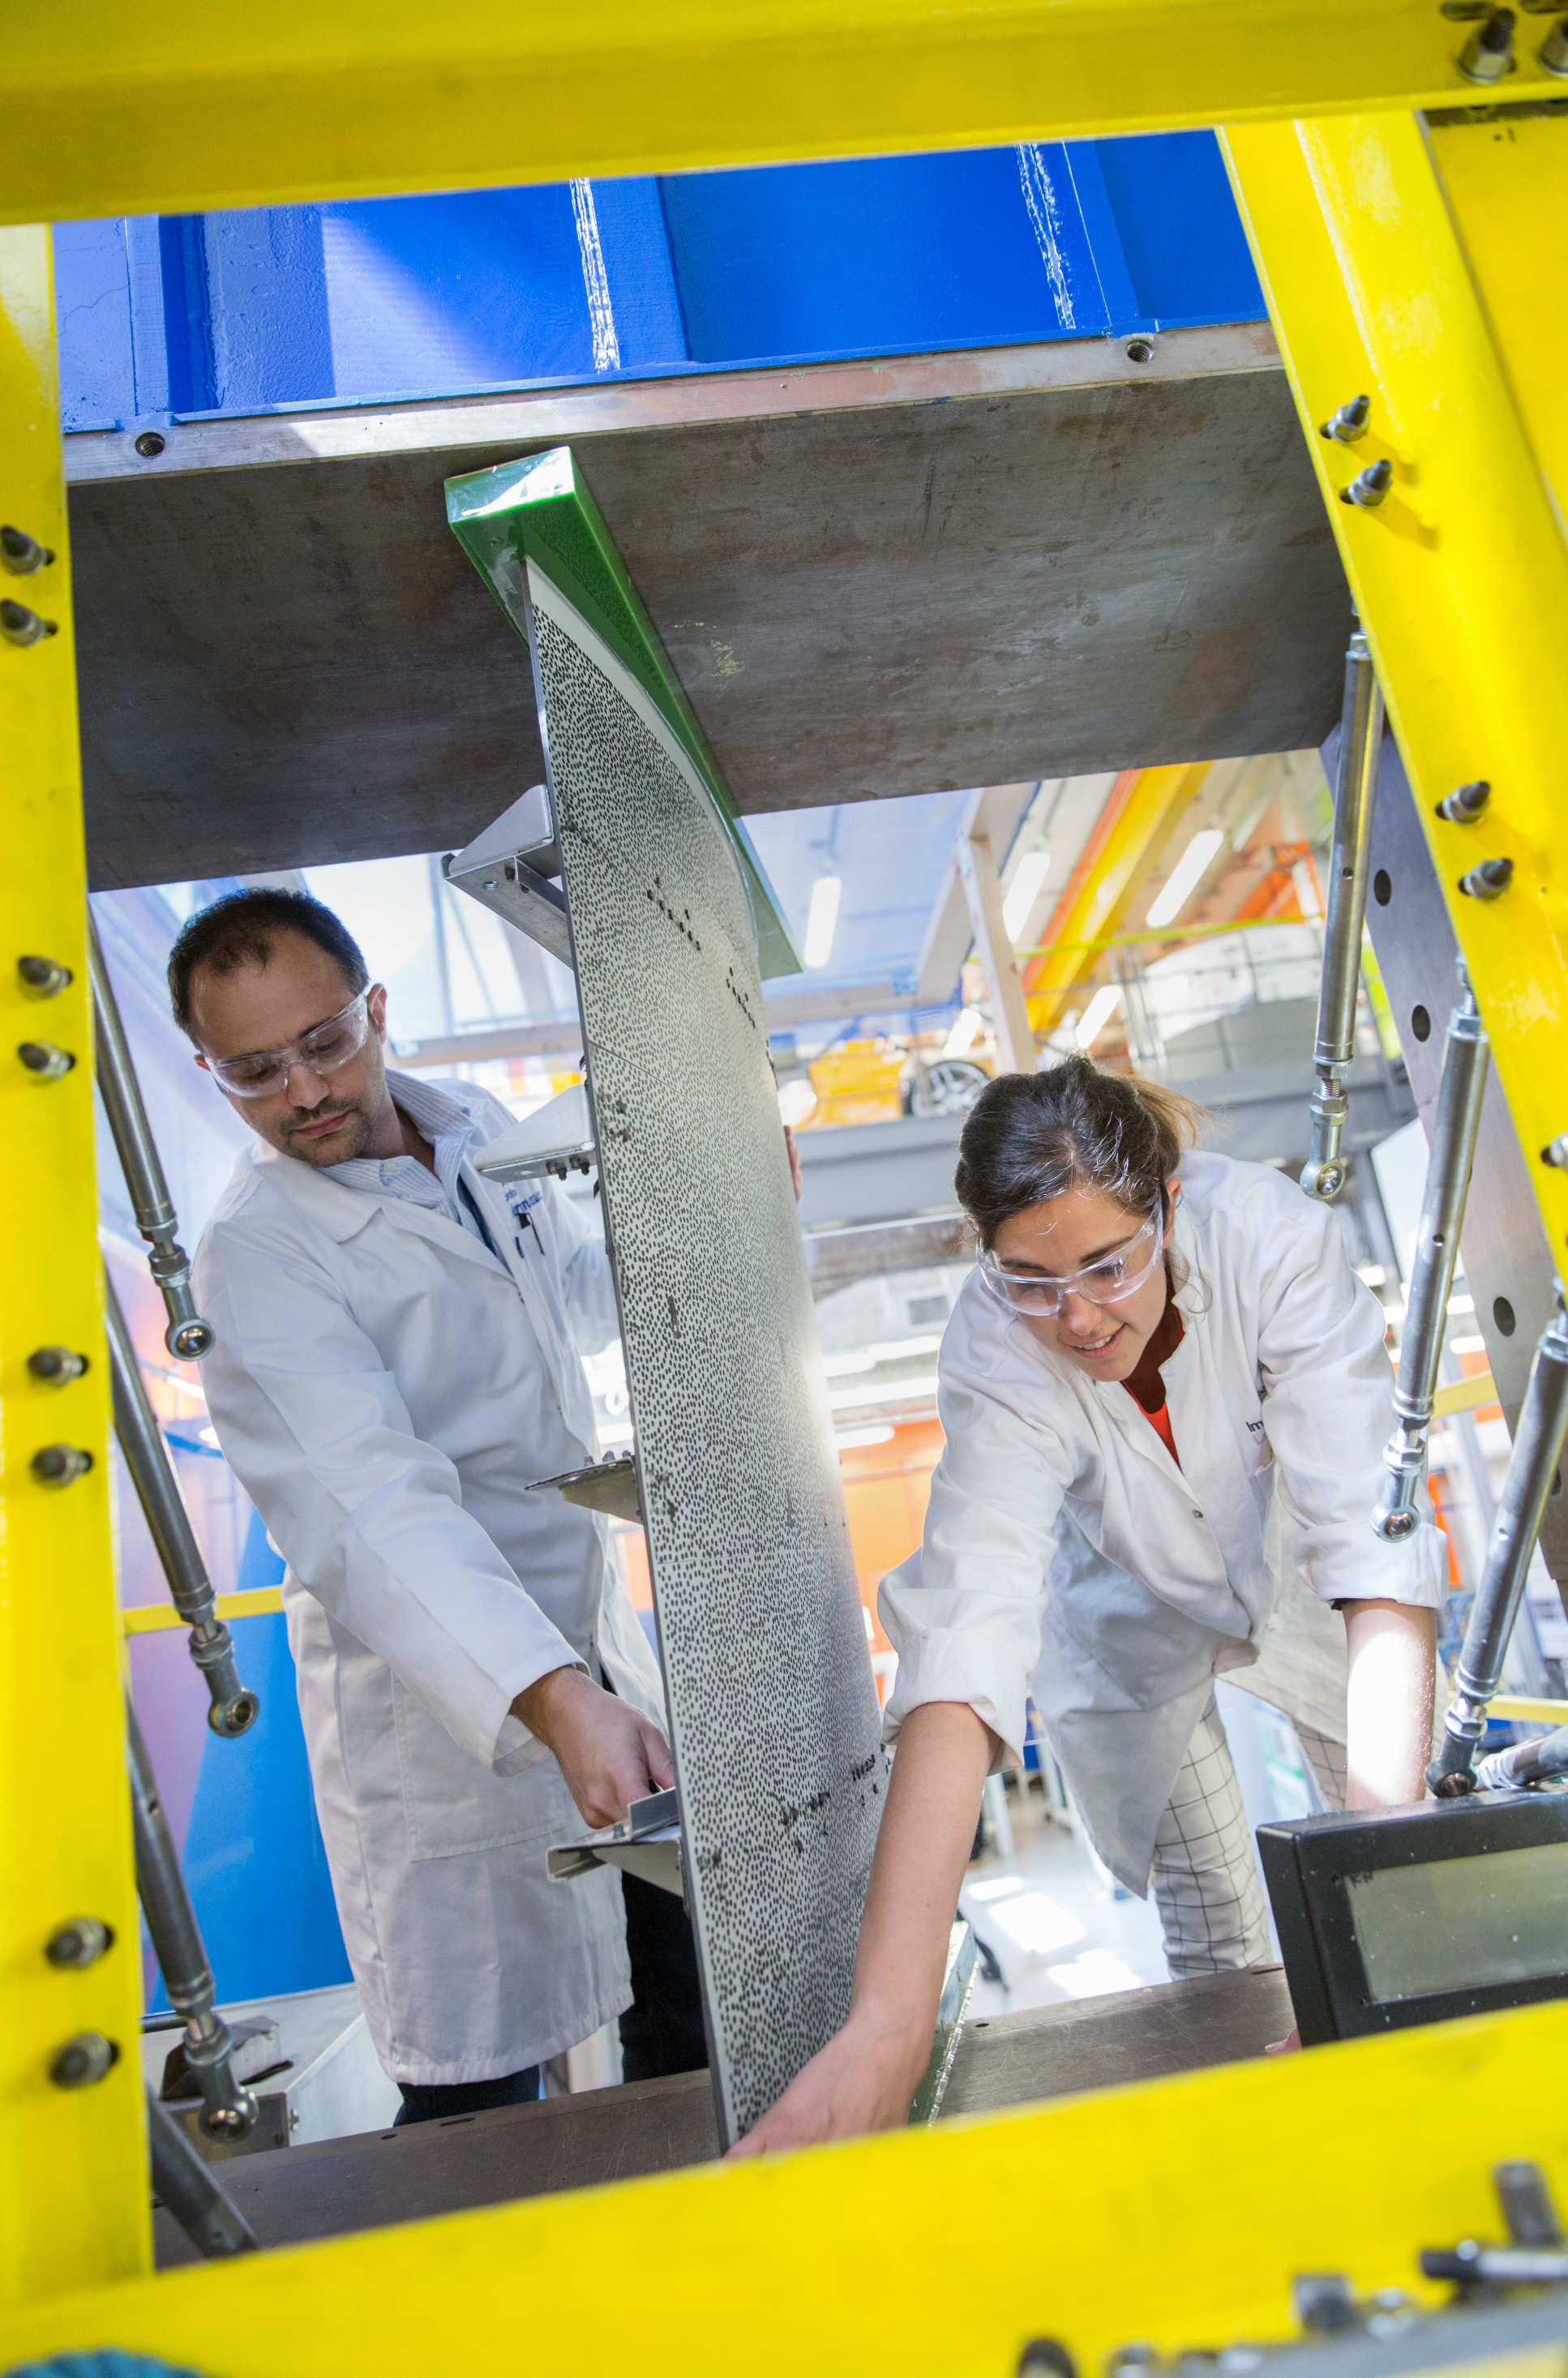 Postdocs Spyros Psarras and Carla Canturri-Gispert in the Dynamic Fracture and Forming Laboratory of the Aeronautics Department